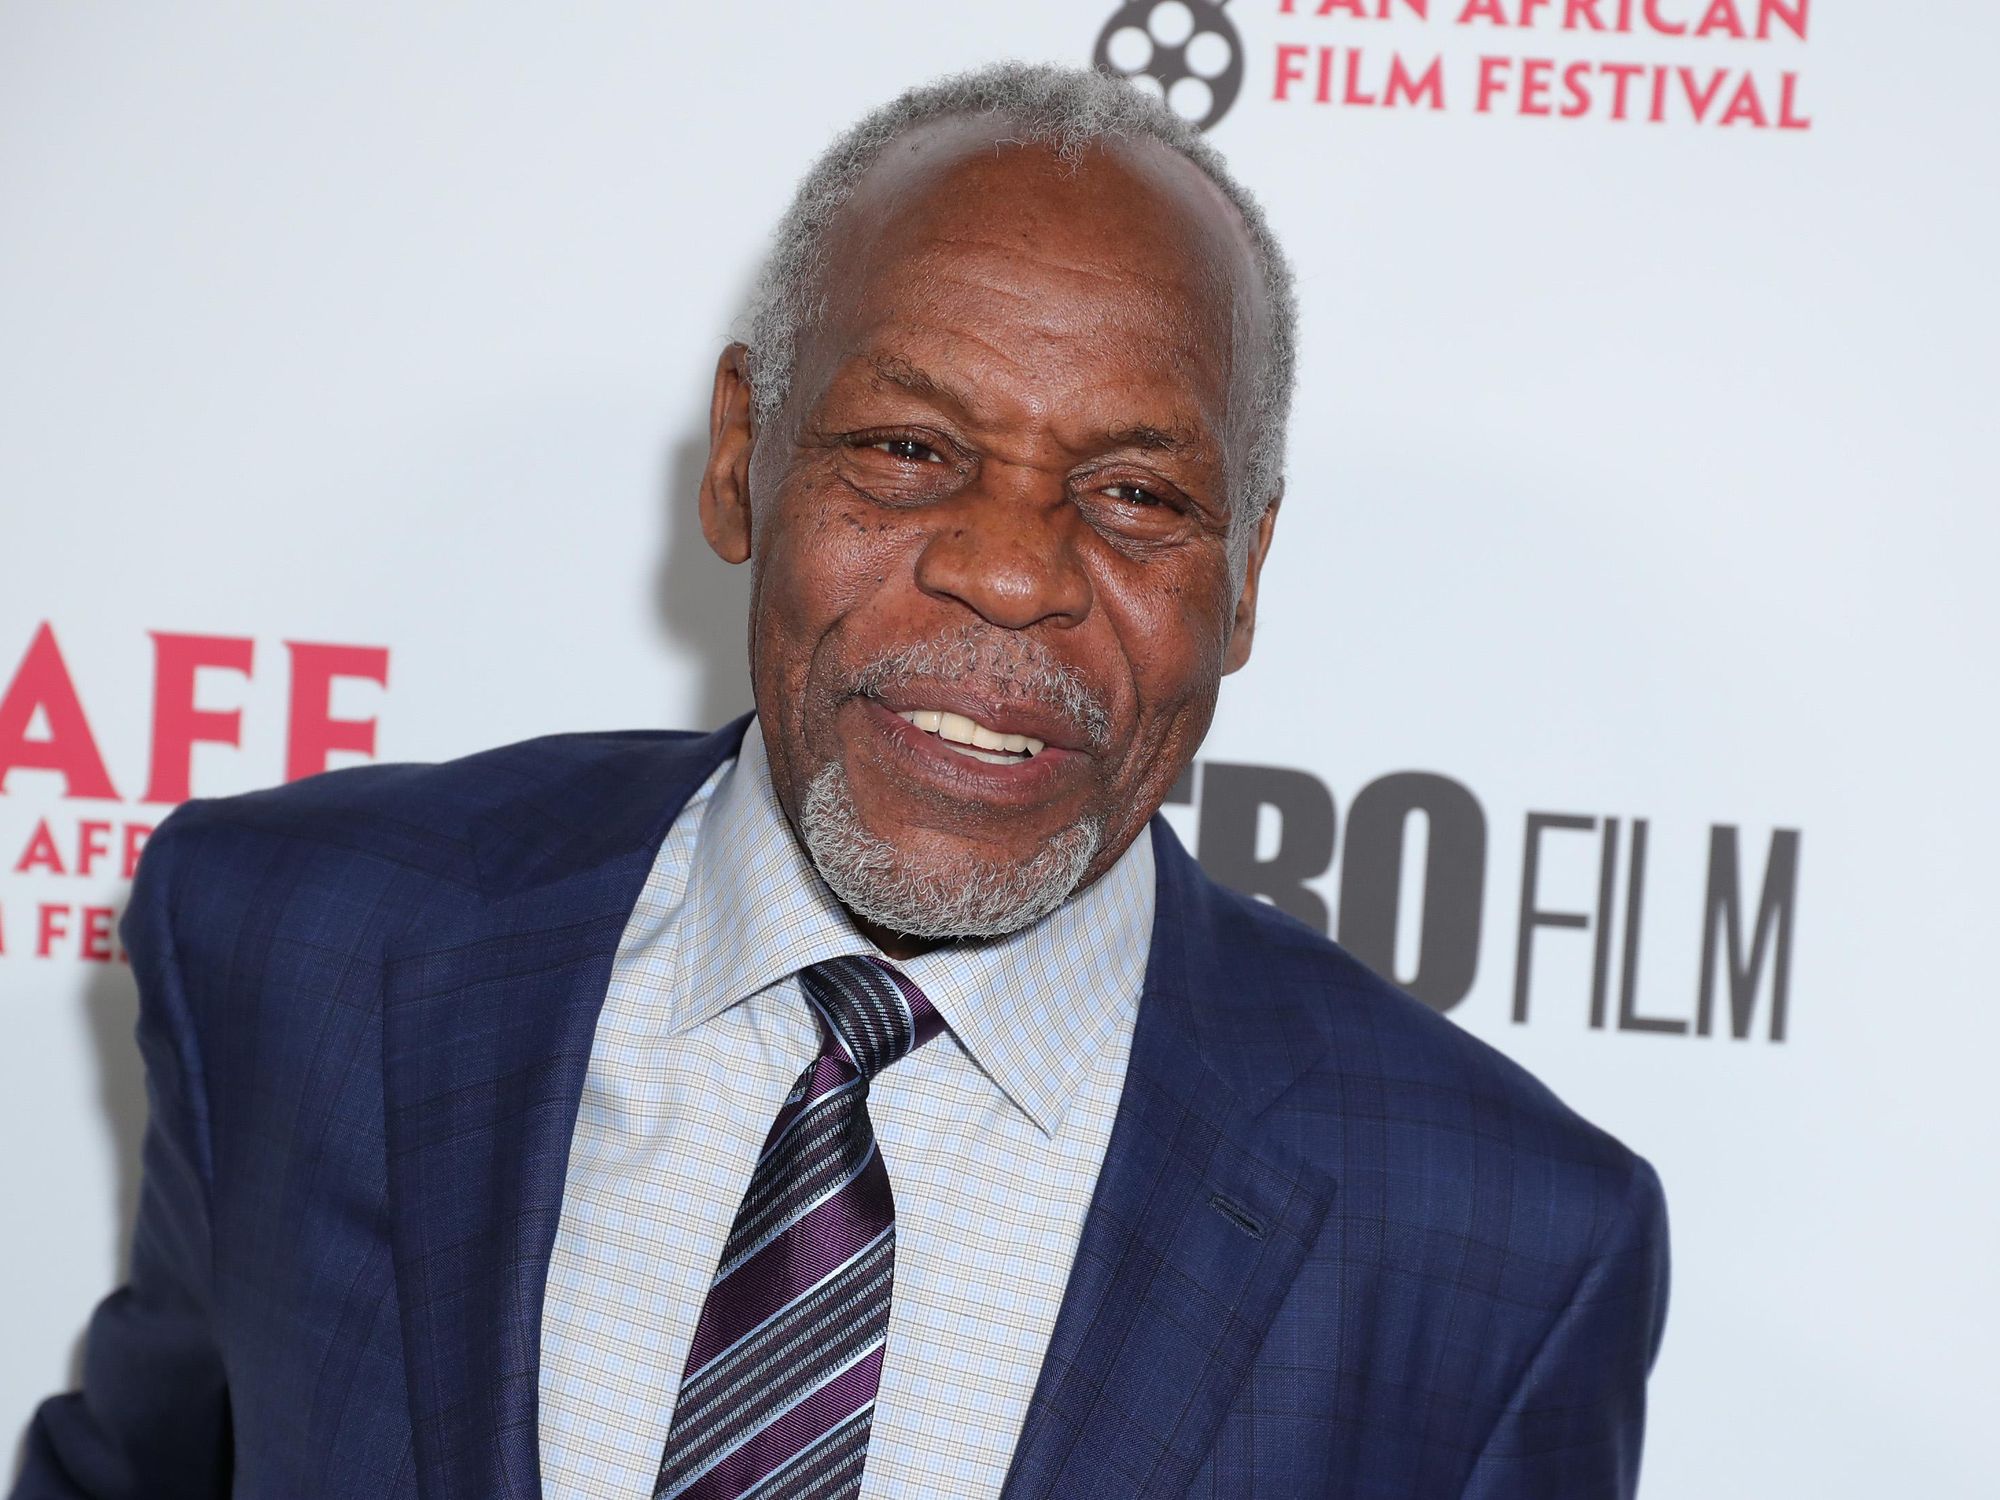 An image of Danny Glover at the 2020 Pan African Film Festival. 